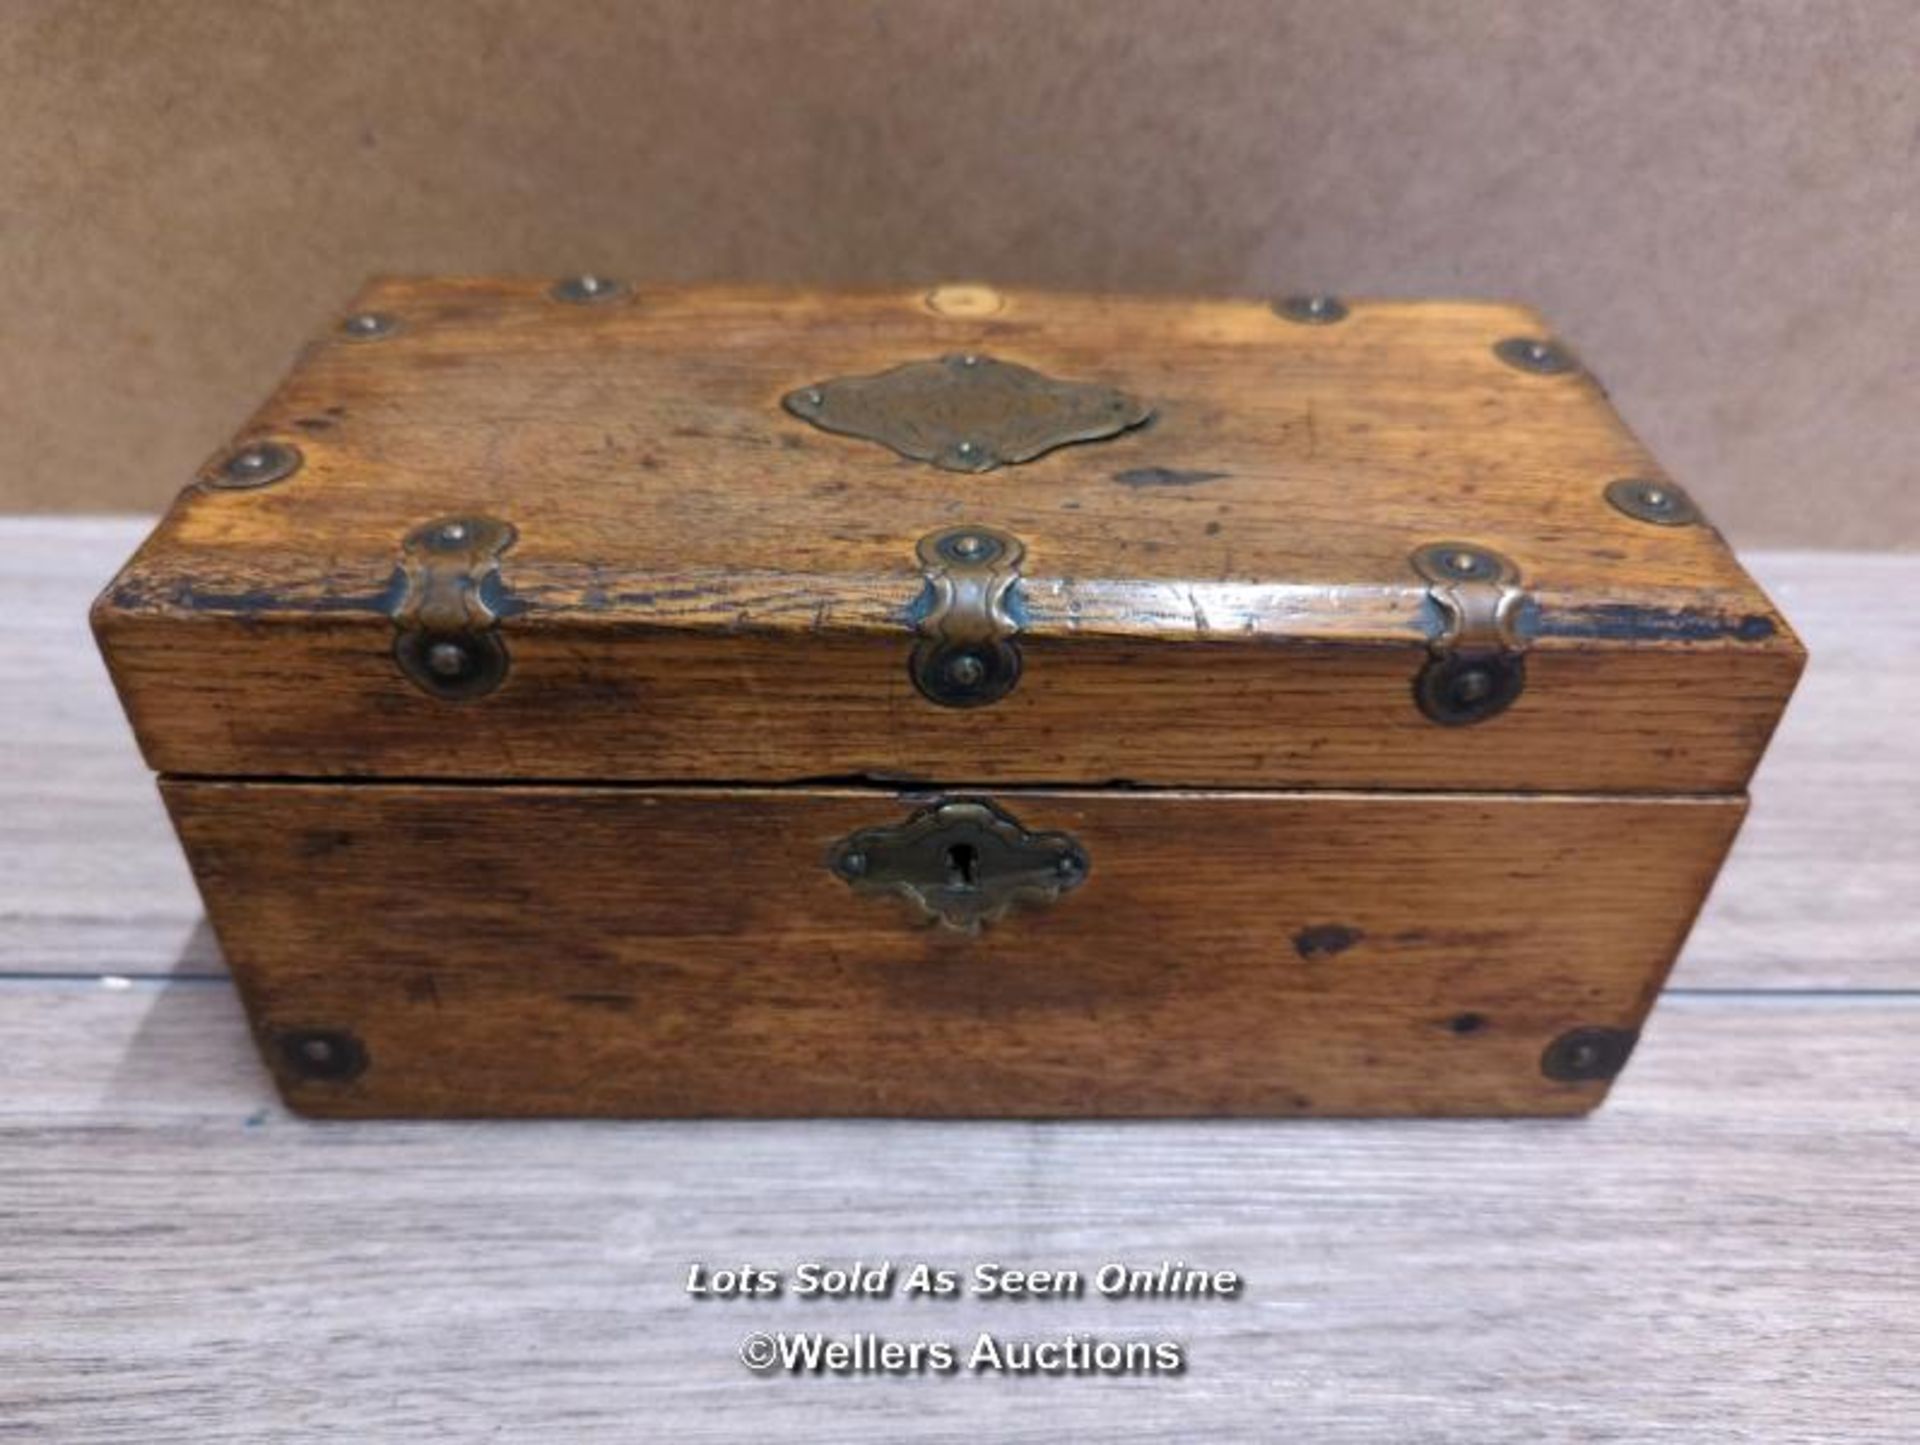 SMALL TWO COMPARTMENT TEA CADDY